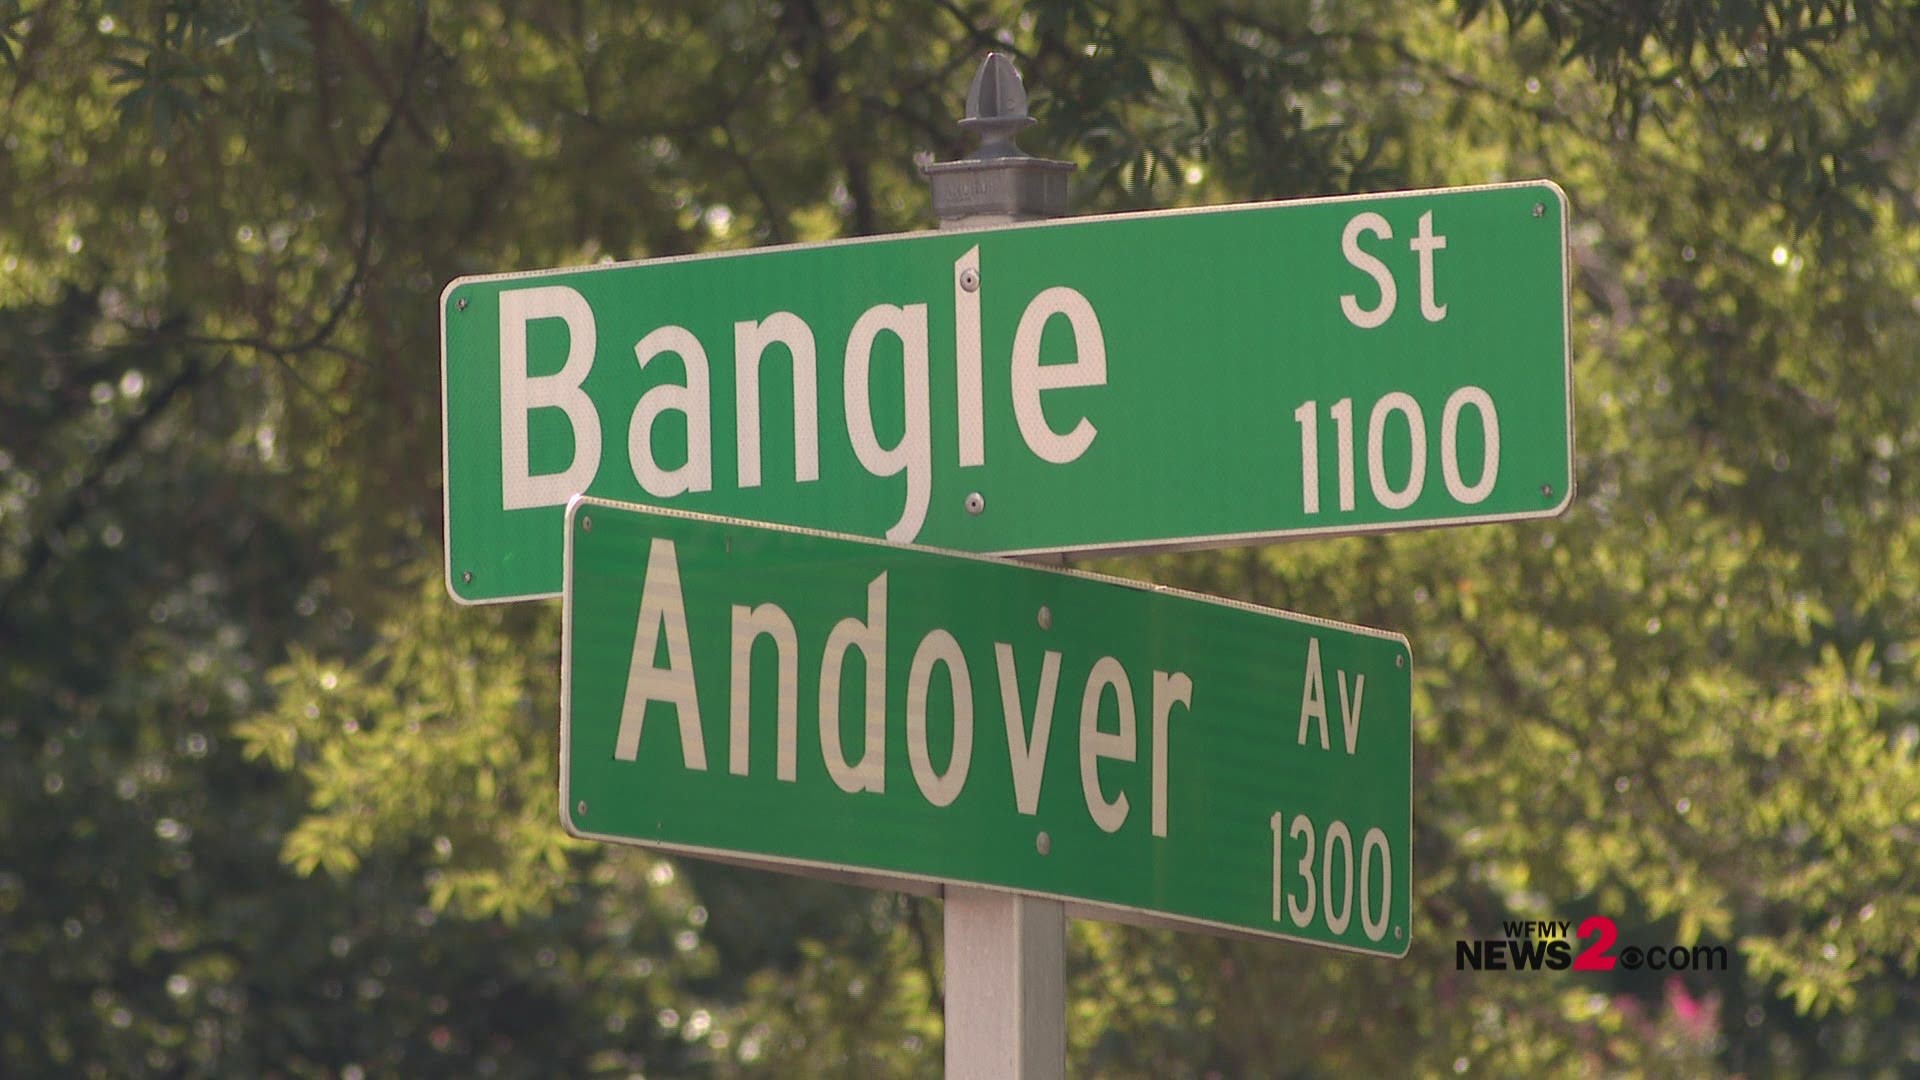 The incident happened Sunday morning around 3:00 a.m. in the 1300 block of Andover Avenue in Greensboro.